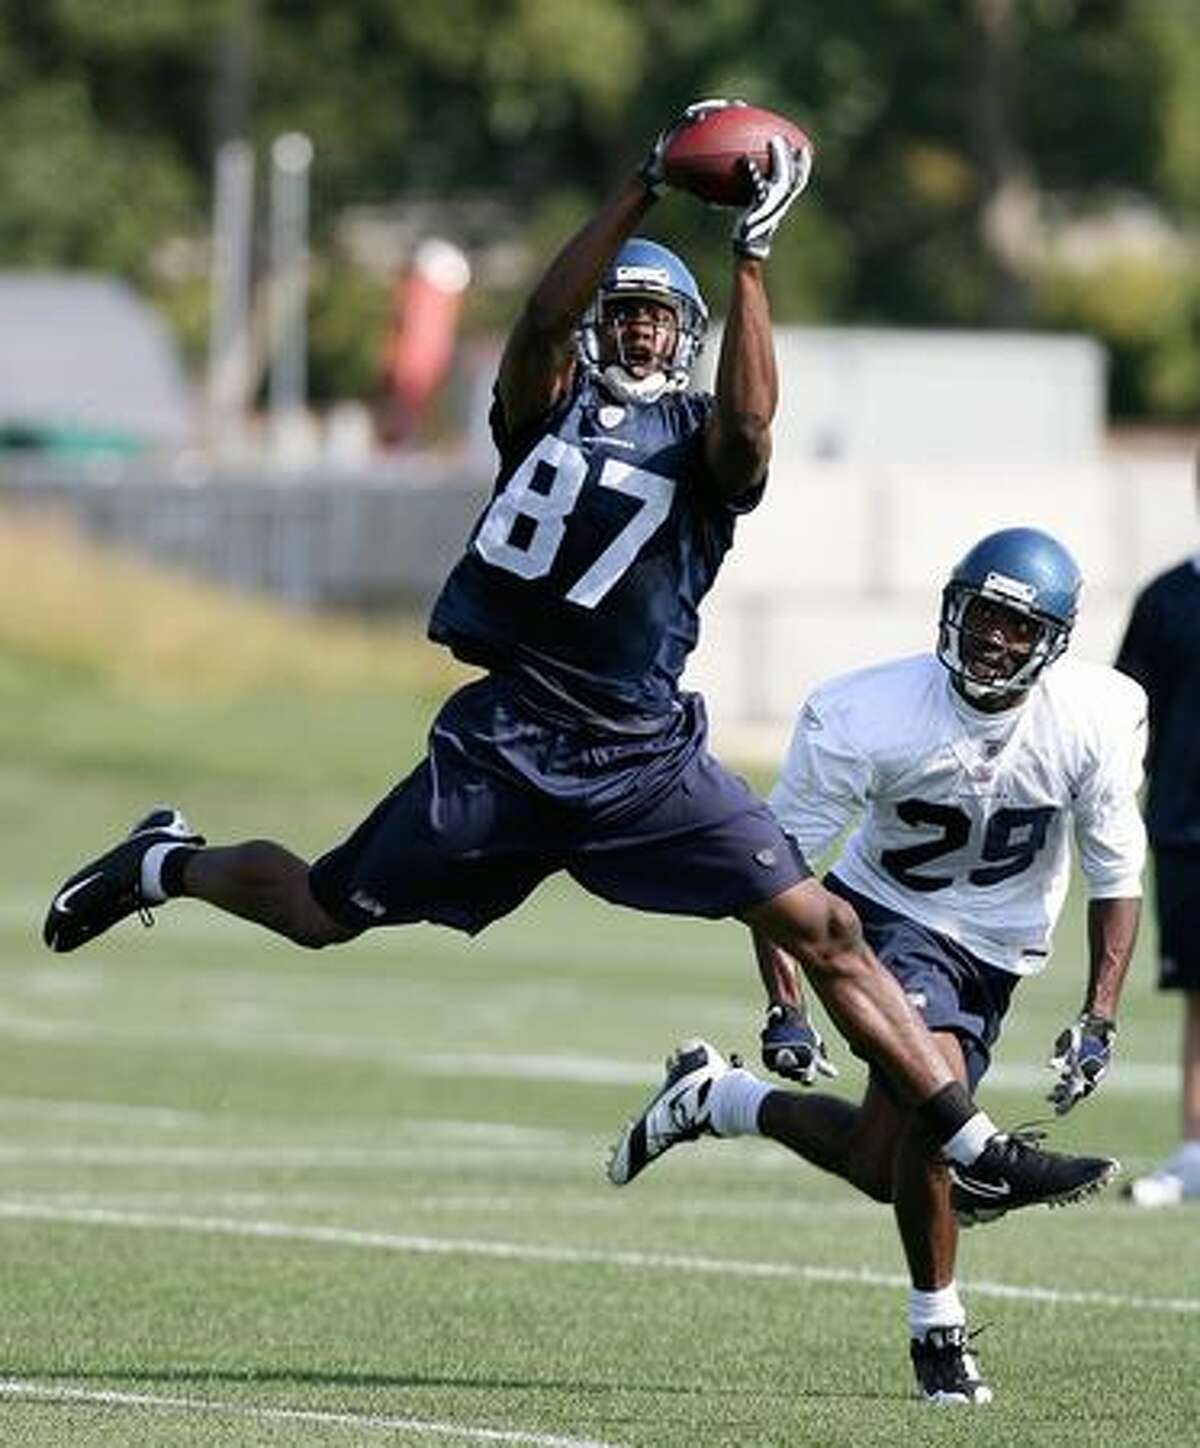 Wide receiver Ben Obomanu makes a leaping catch against Marquis Floyd on Friday.